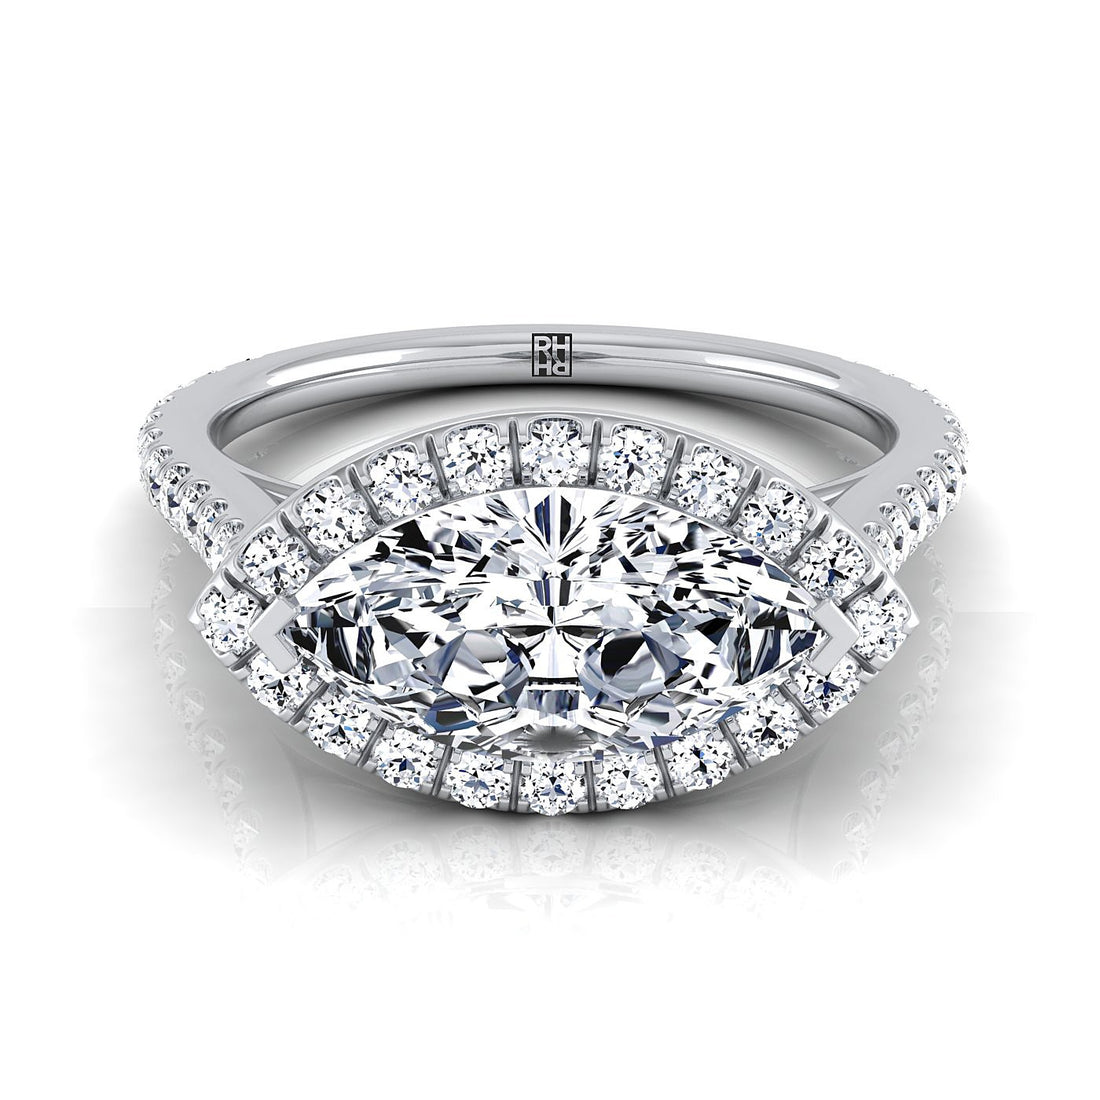 The Marquise Cut Diamond Engagement Ring with Halo